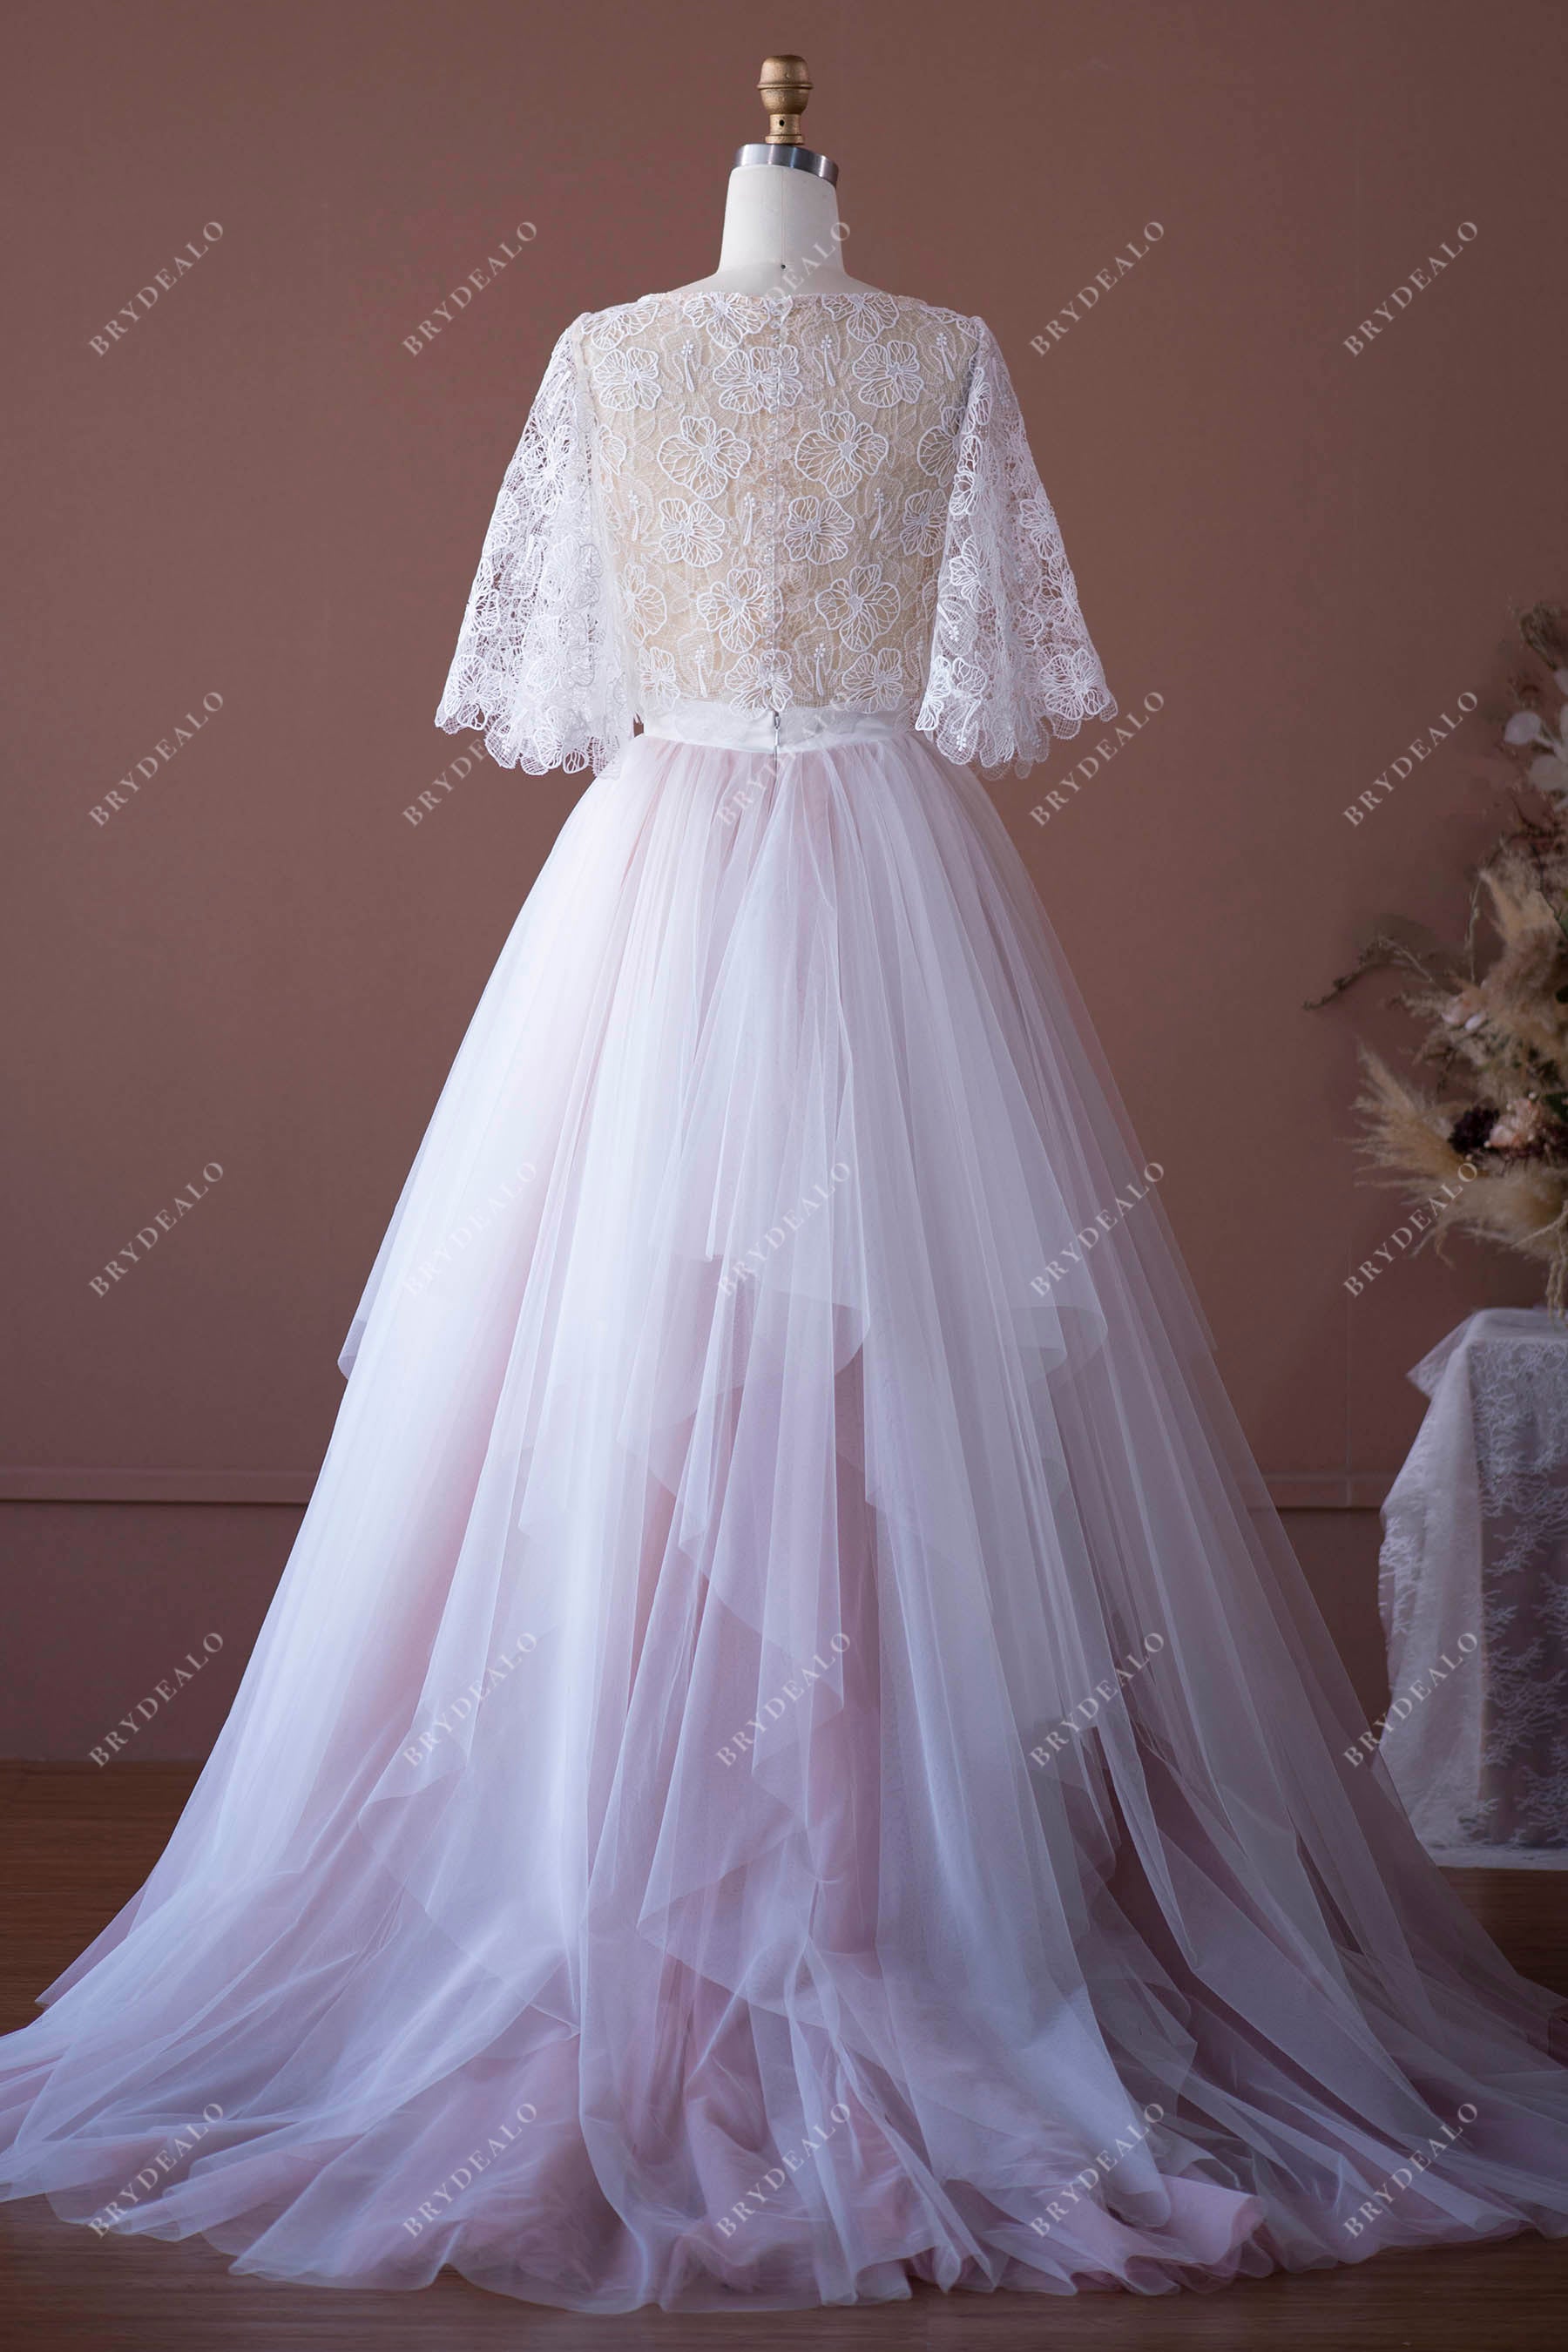 Sample Sale | Two-Piece Flower Lace Tulle Layered Wedding Dress